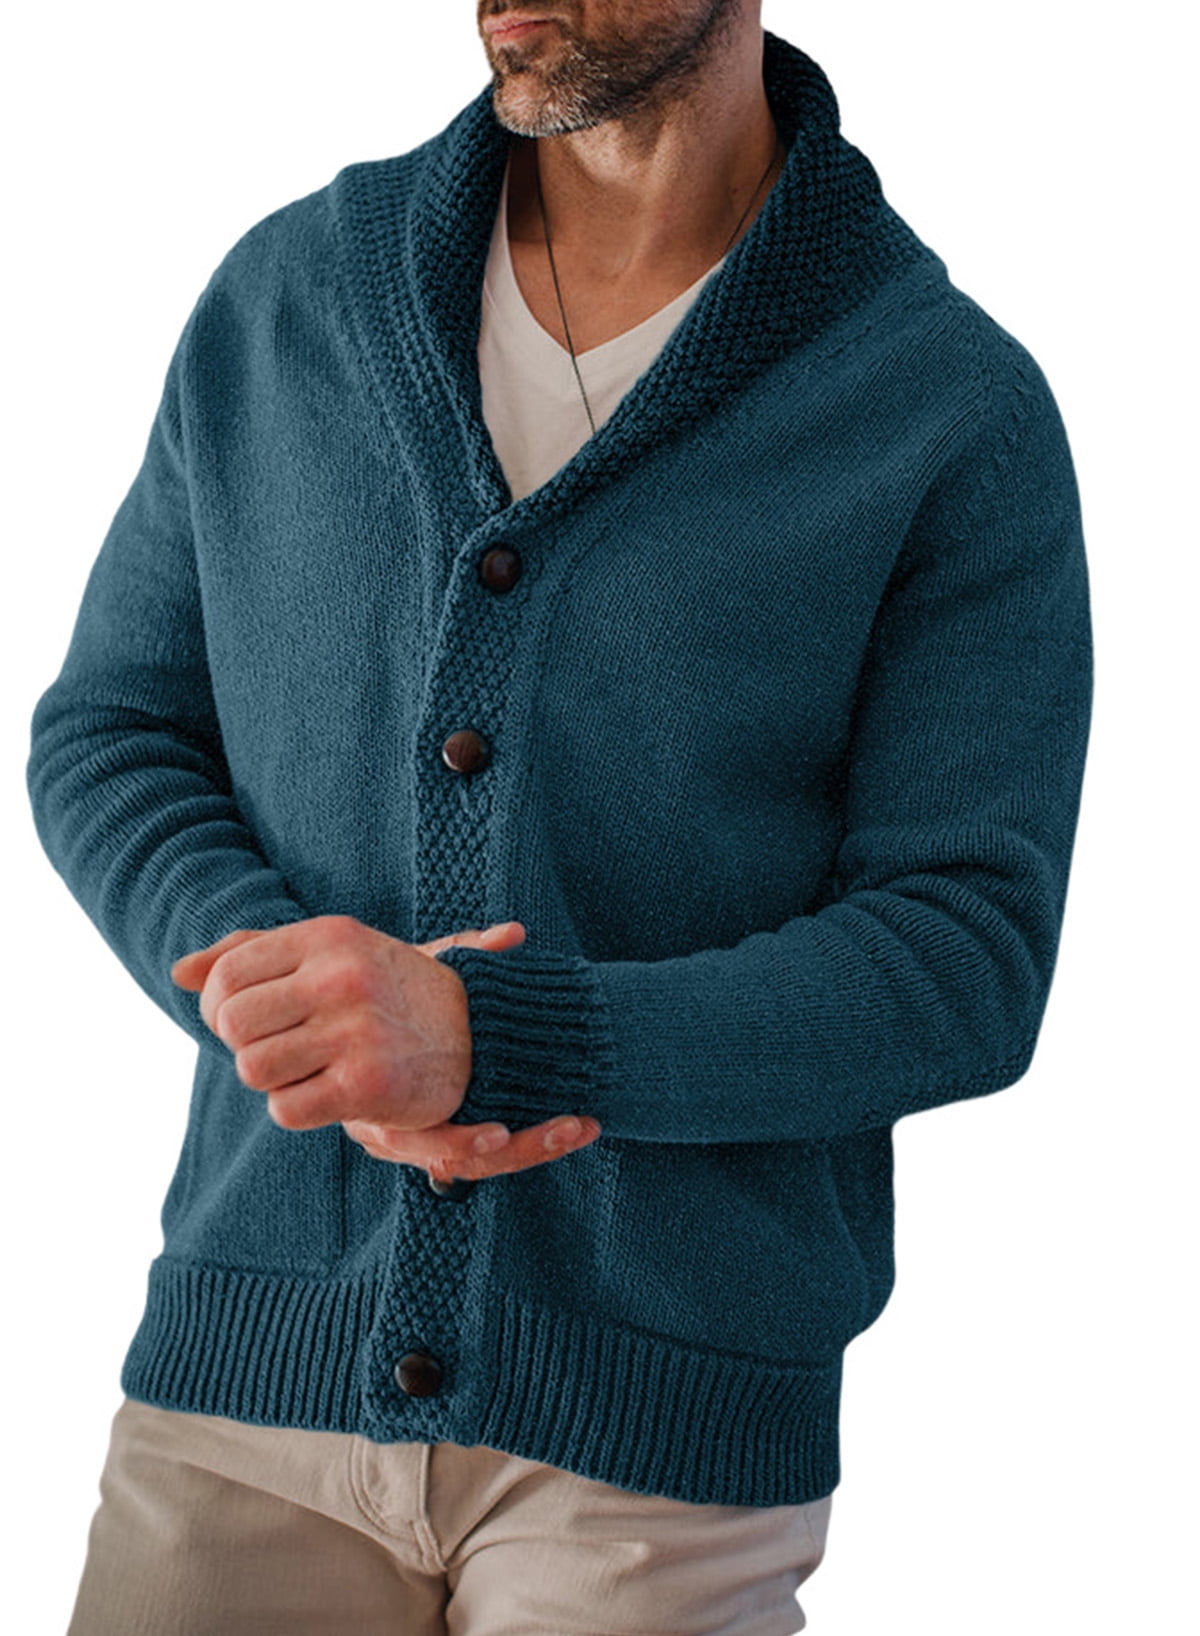 JMIERR Mens Sweaters Long Sleeve V Neck Cardigan Sweater Button Up ...